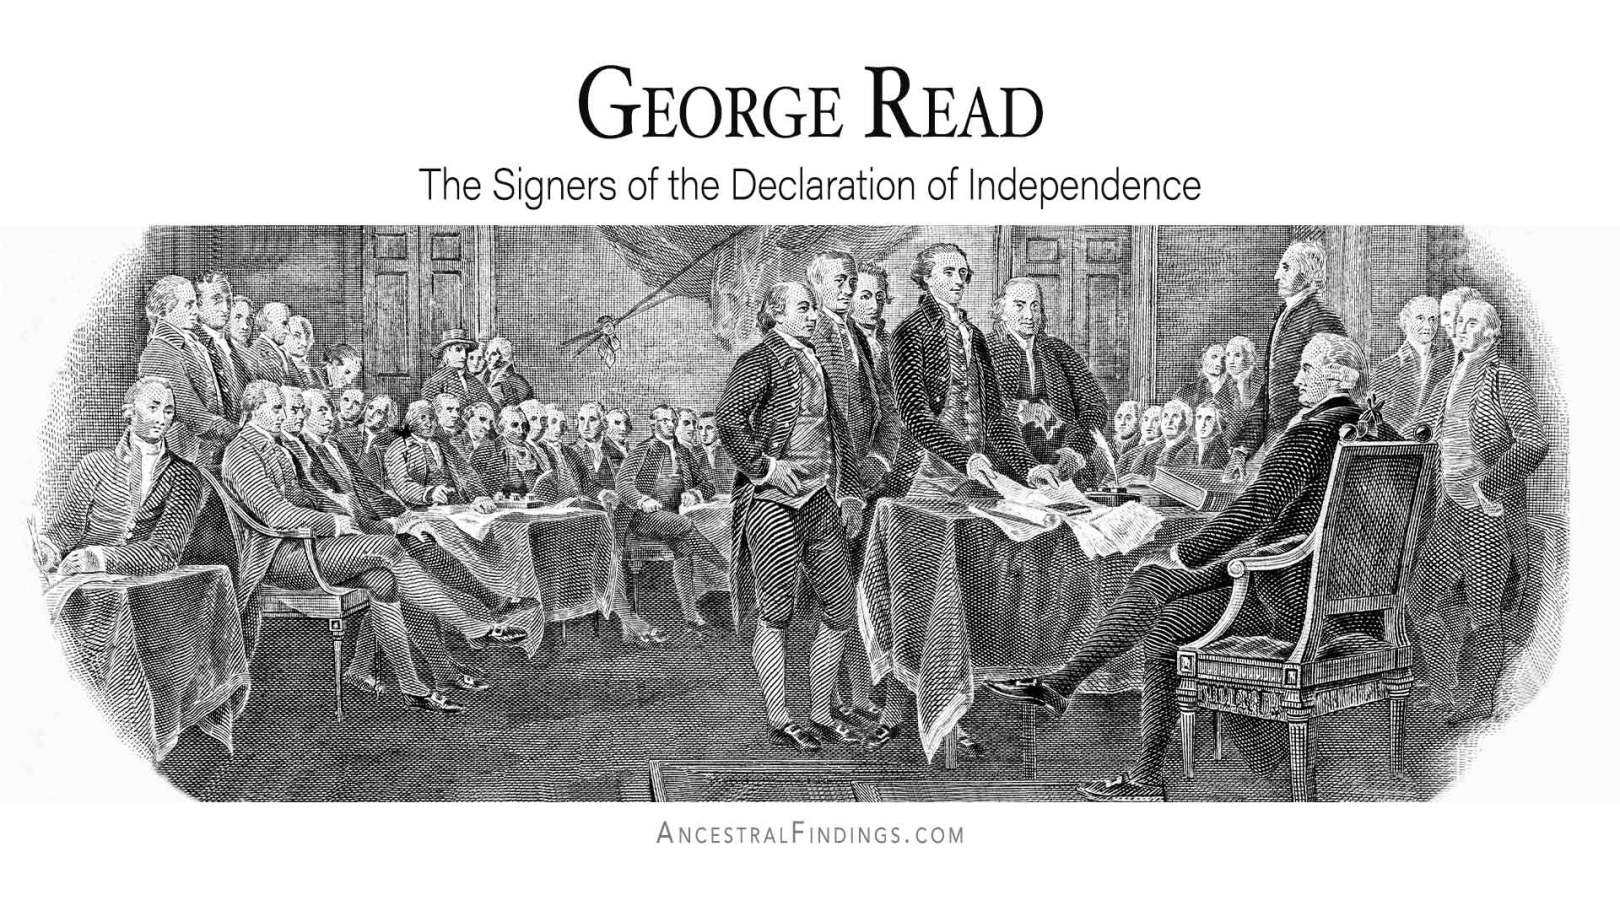 George Read: The Signers of the Declaration of Independence